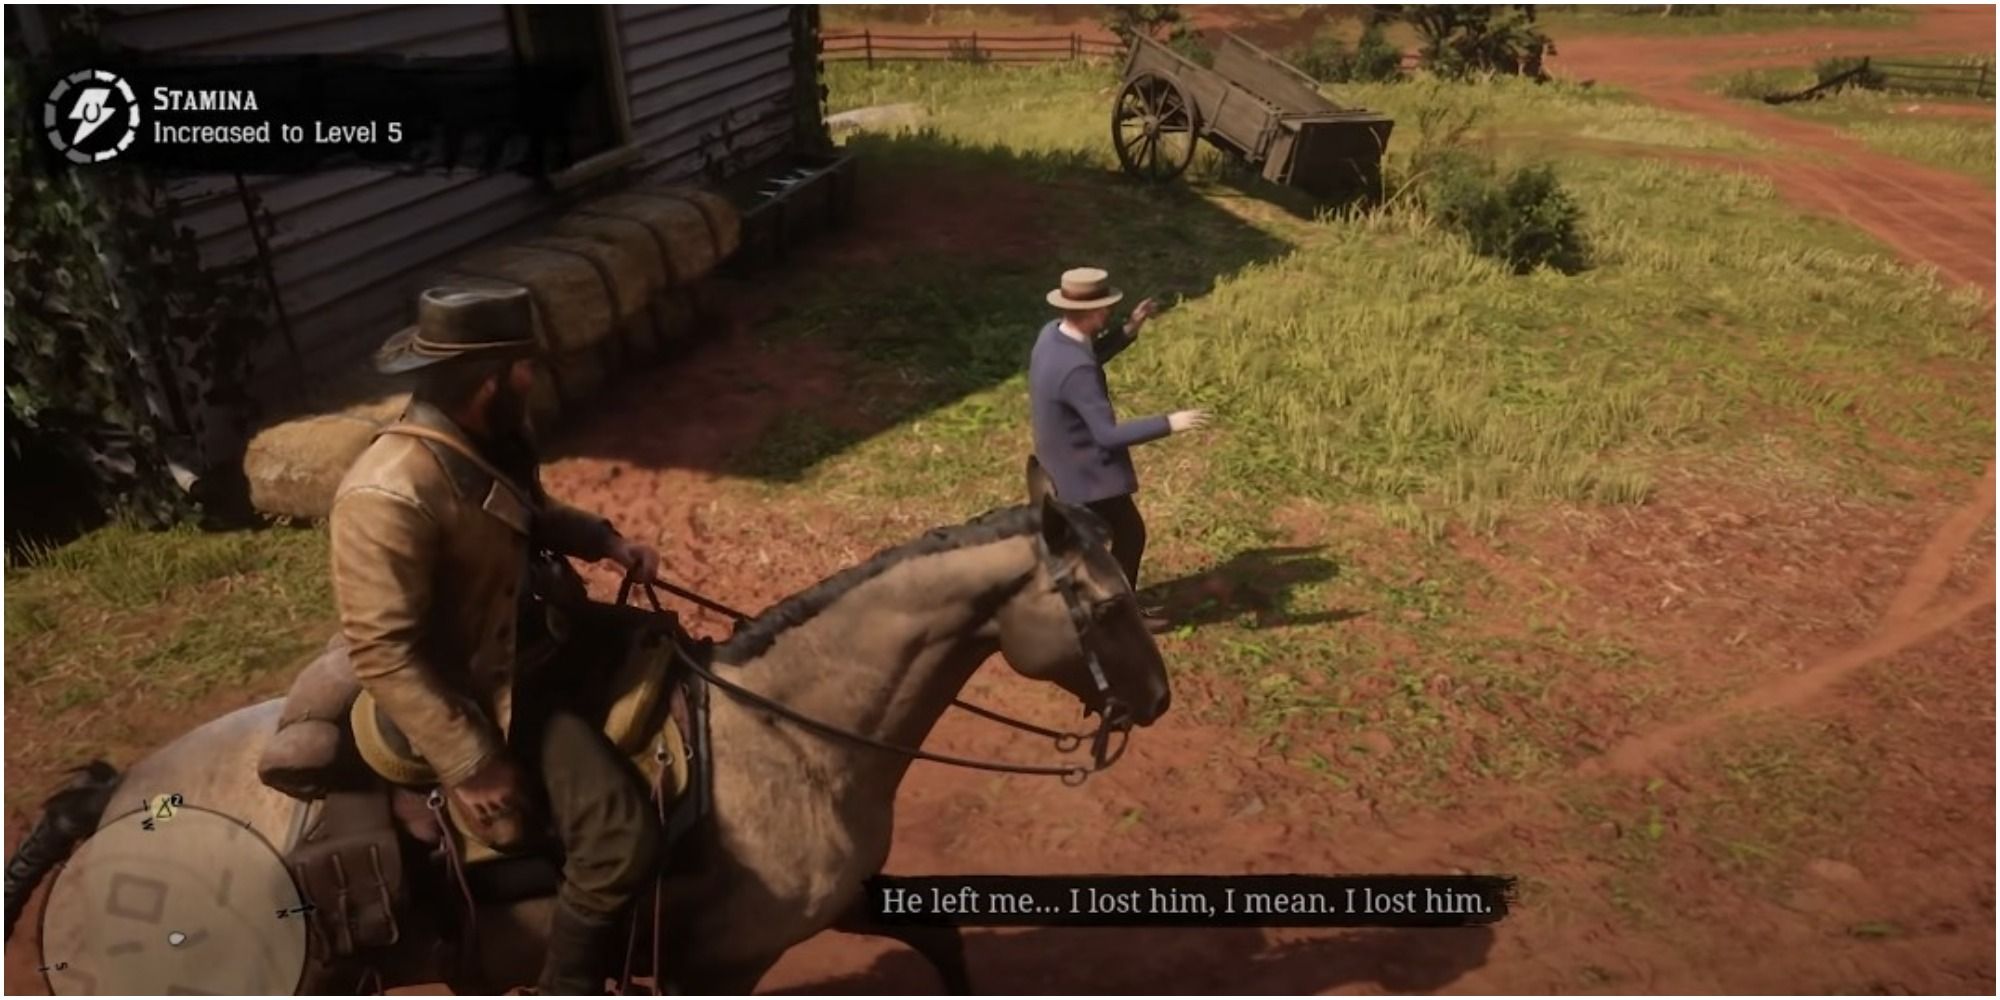 Red Dead Redemption 2 Nigel Suggesting That Gavin May Have Left Him